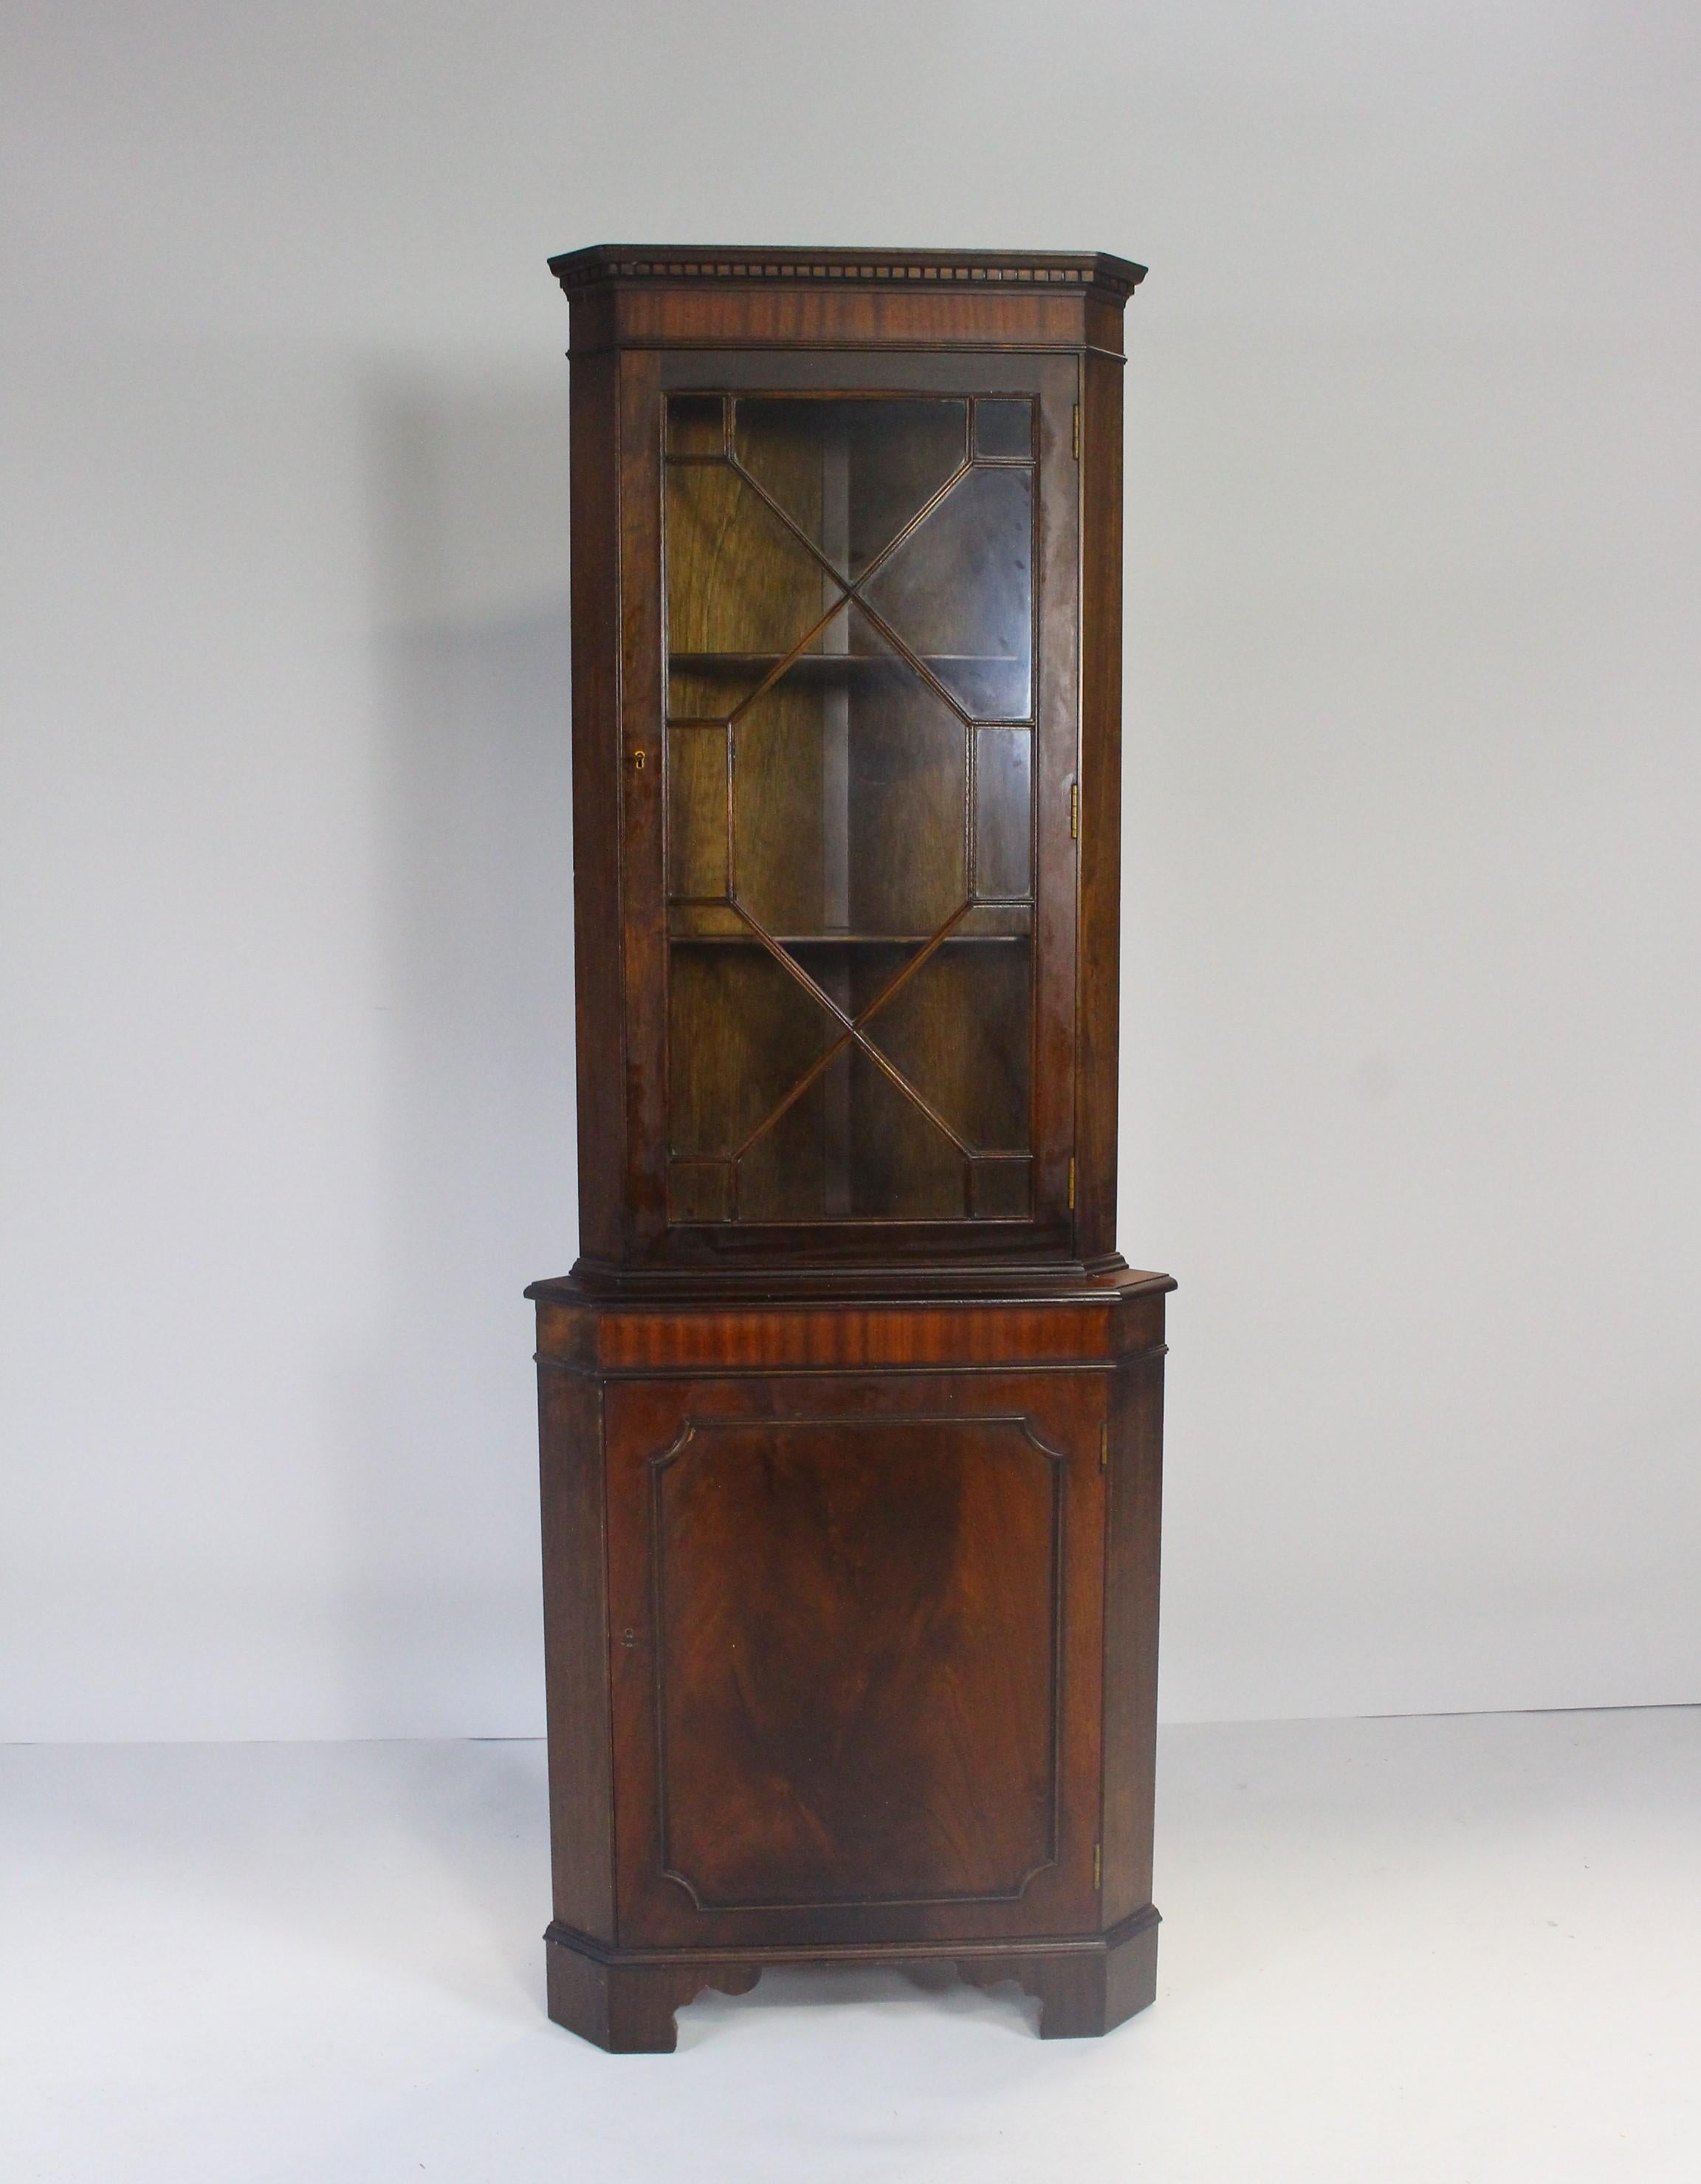 Antique mahogany corner cabinet with glazed display above a cupboard.
A beautiful, functional piece of furniture with nice wood grain on the front of the door.
Slight scratches.